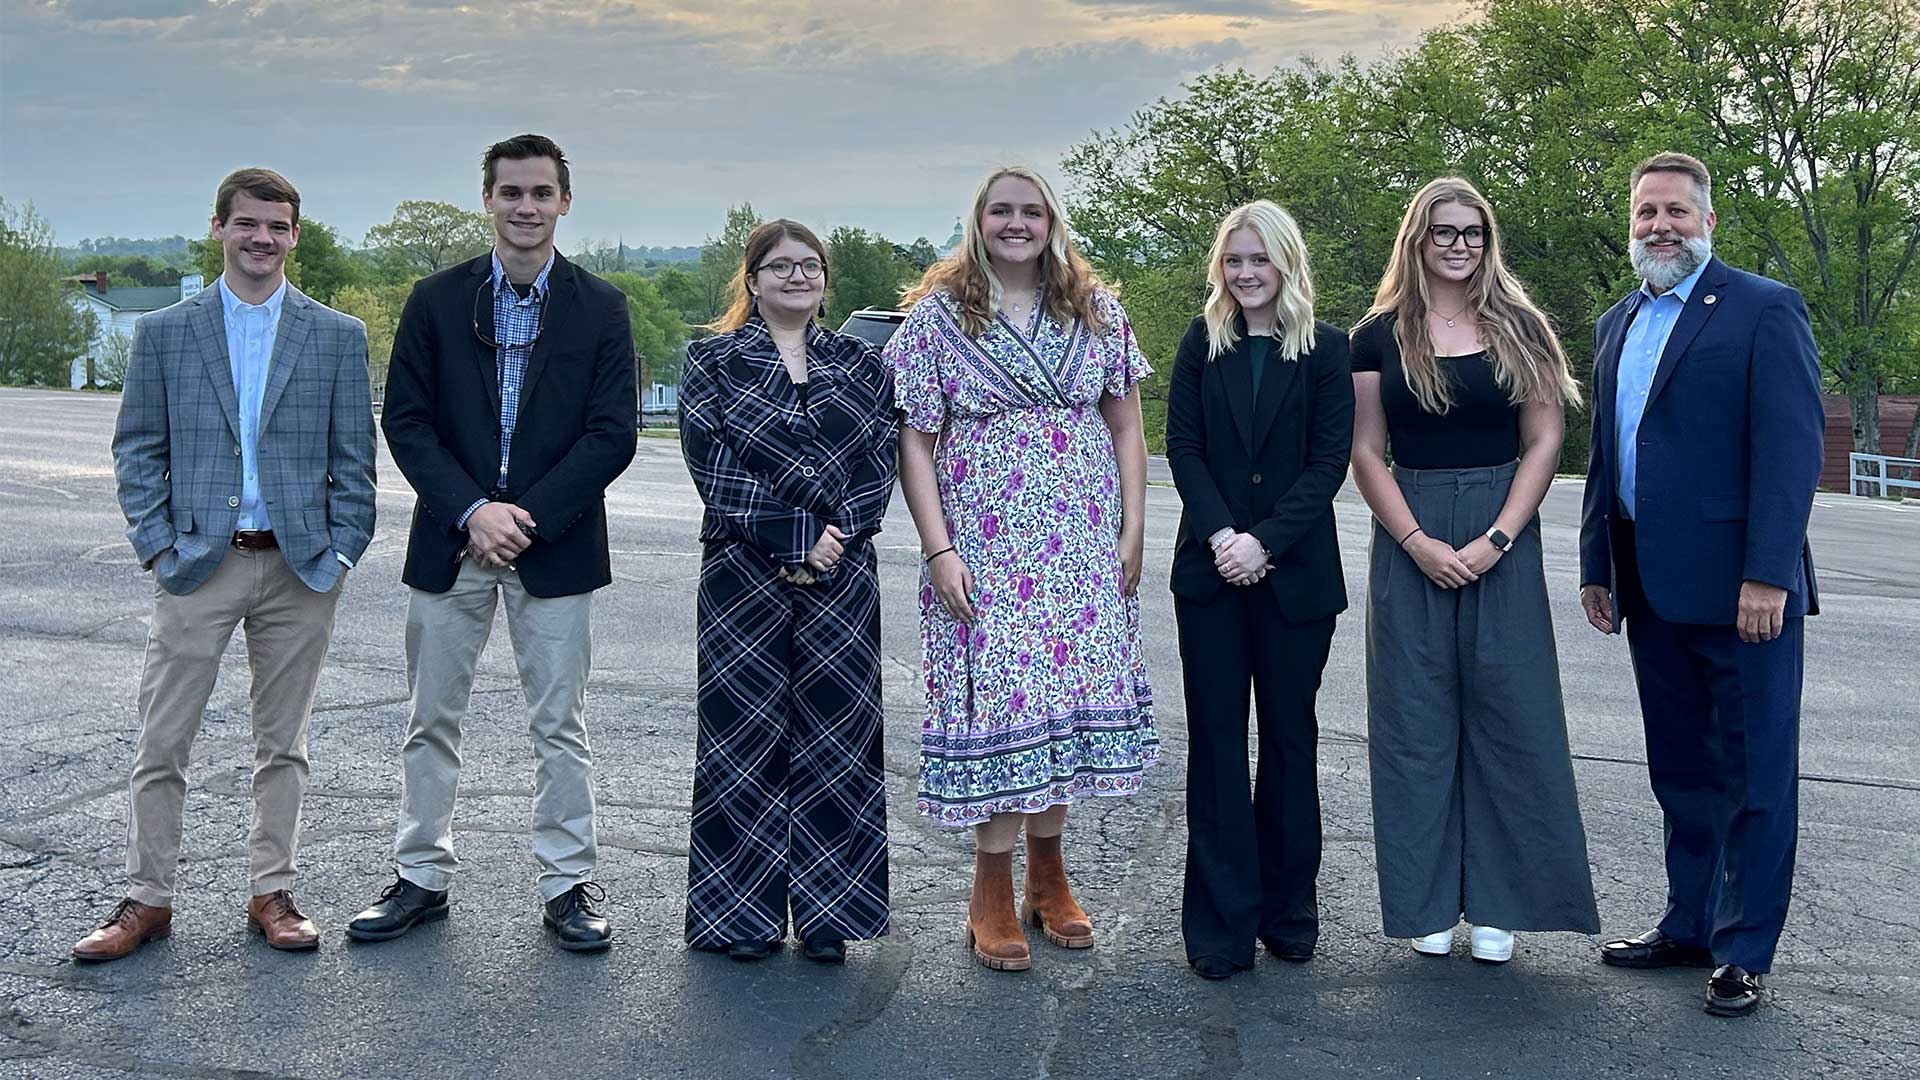 Ingram Scholars 2024 (second year) From left: Jay Carroll, Lincoln County; Colin Cheplen, Giles County; Aaliyah Dunavant, Lawrence County; Paige Stiles, Marshall County; Mercie Ashmore, Lewis County; Bibi Crane, Maury County; Pat Ford, director.